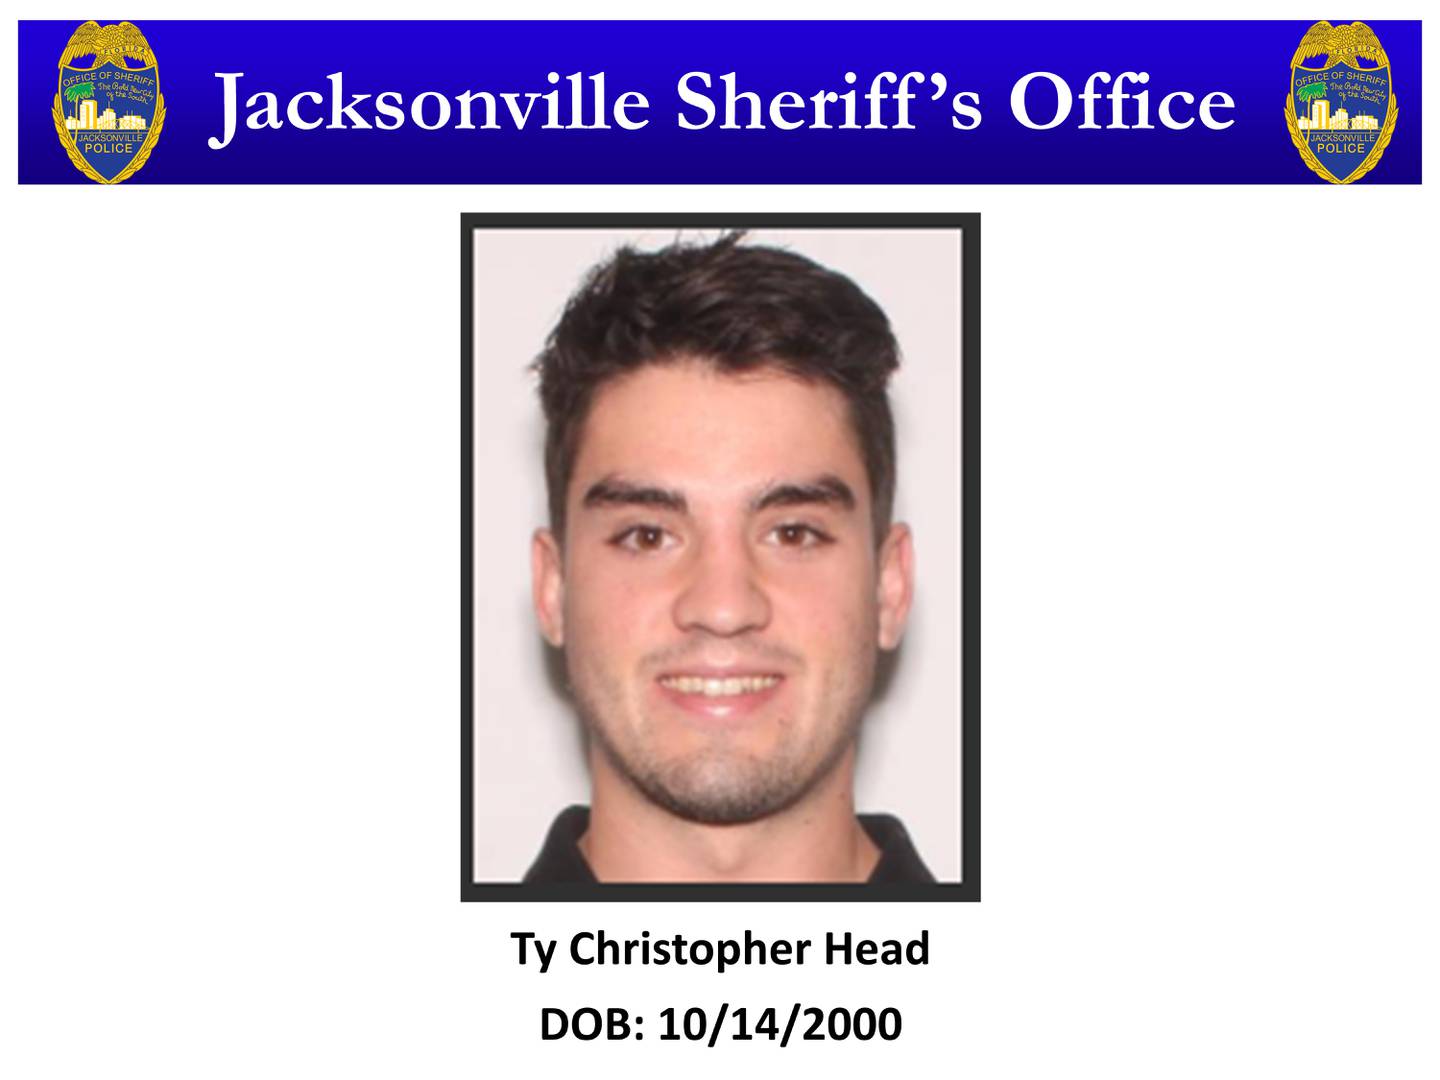 Jacksonville Sheriff's Office announces perpetrator in San Marco double murder, 22-year-old Ty Christopher Head.